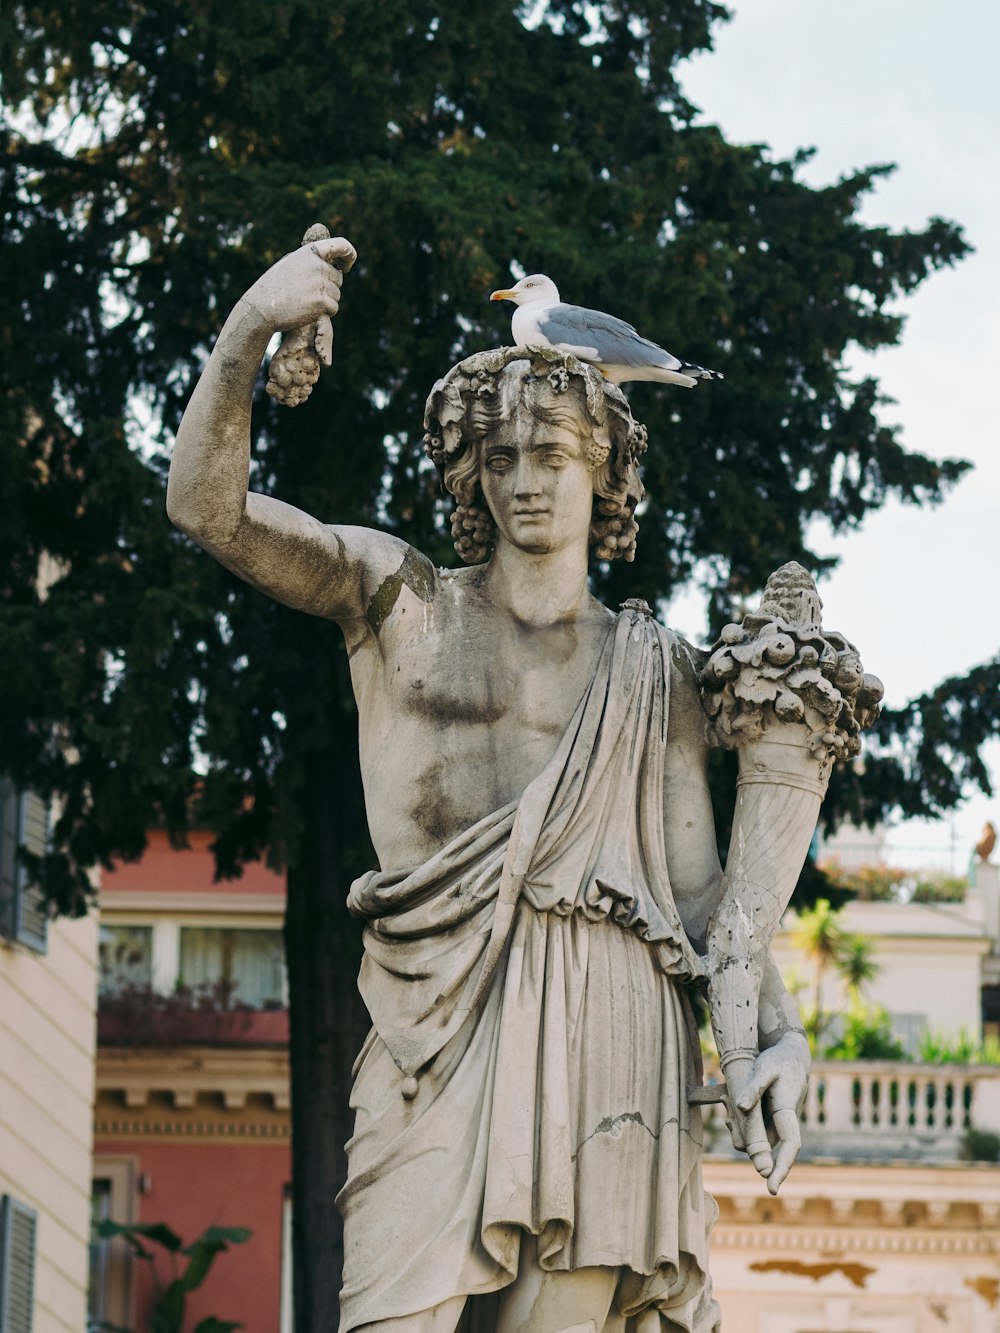 a statue of a man with a bird on his head